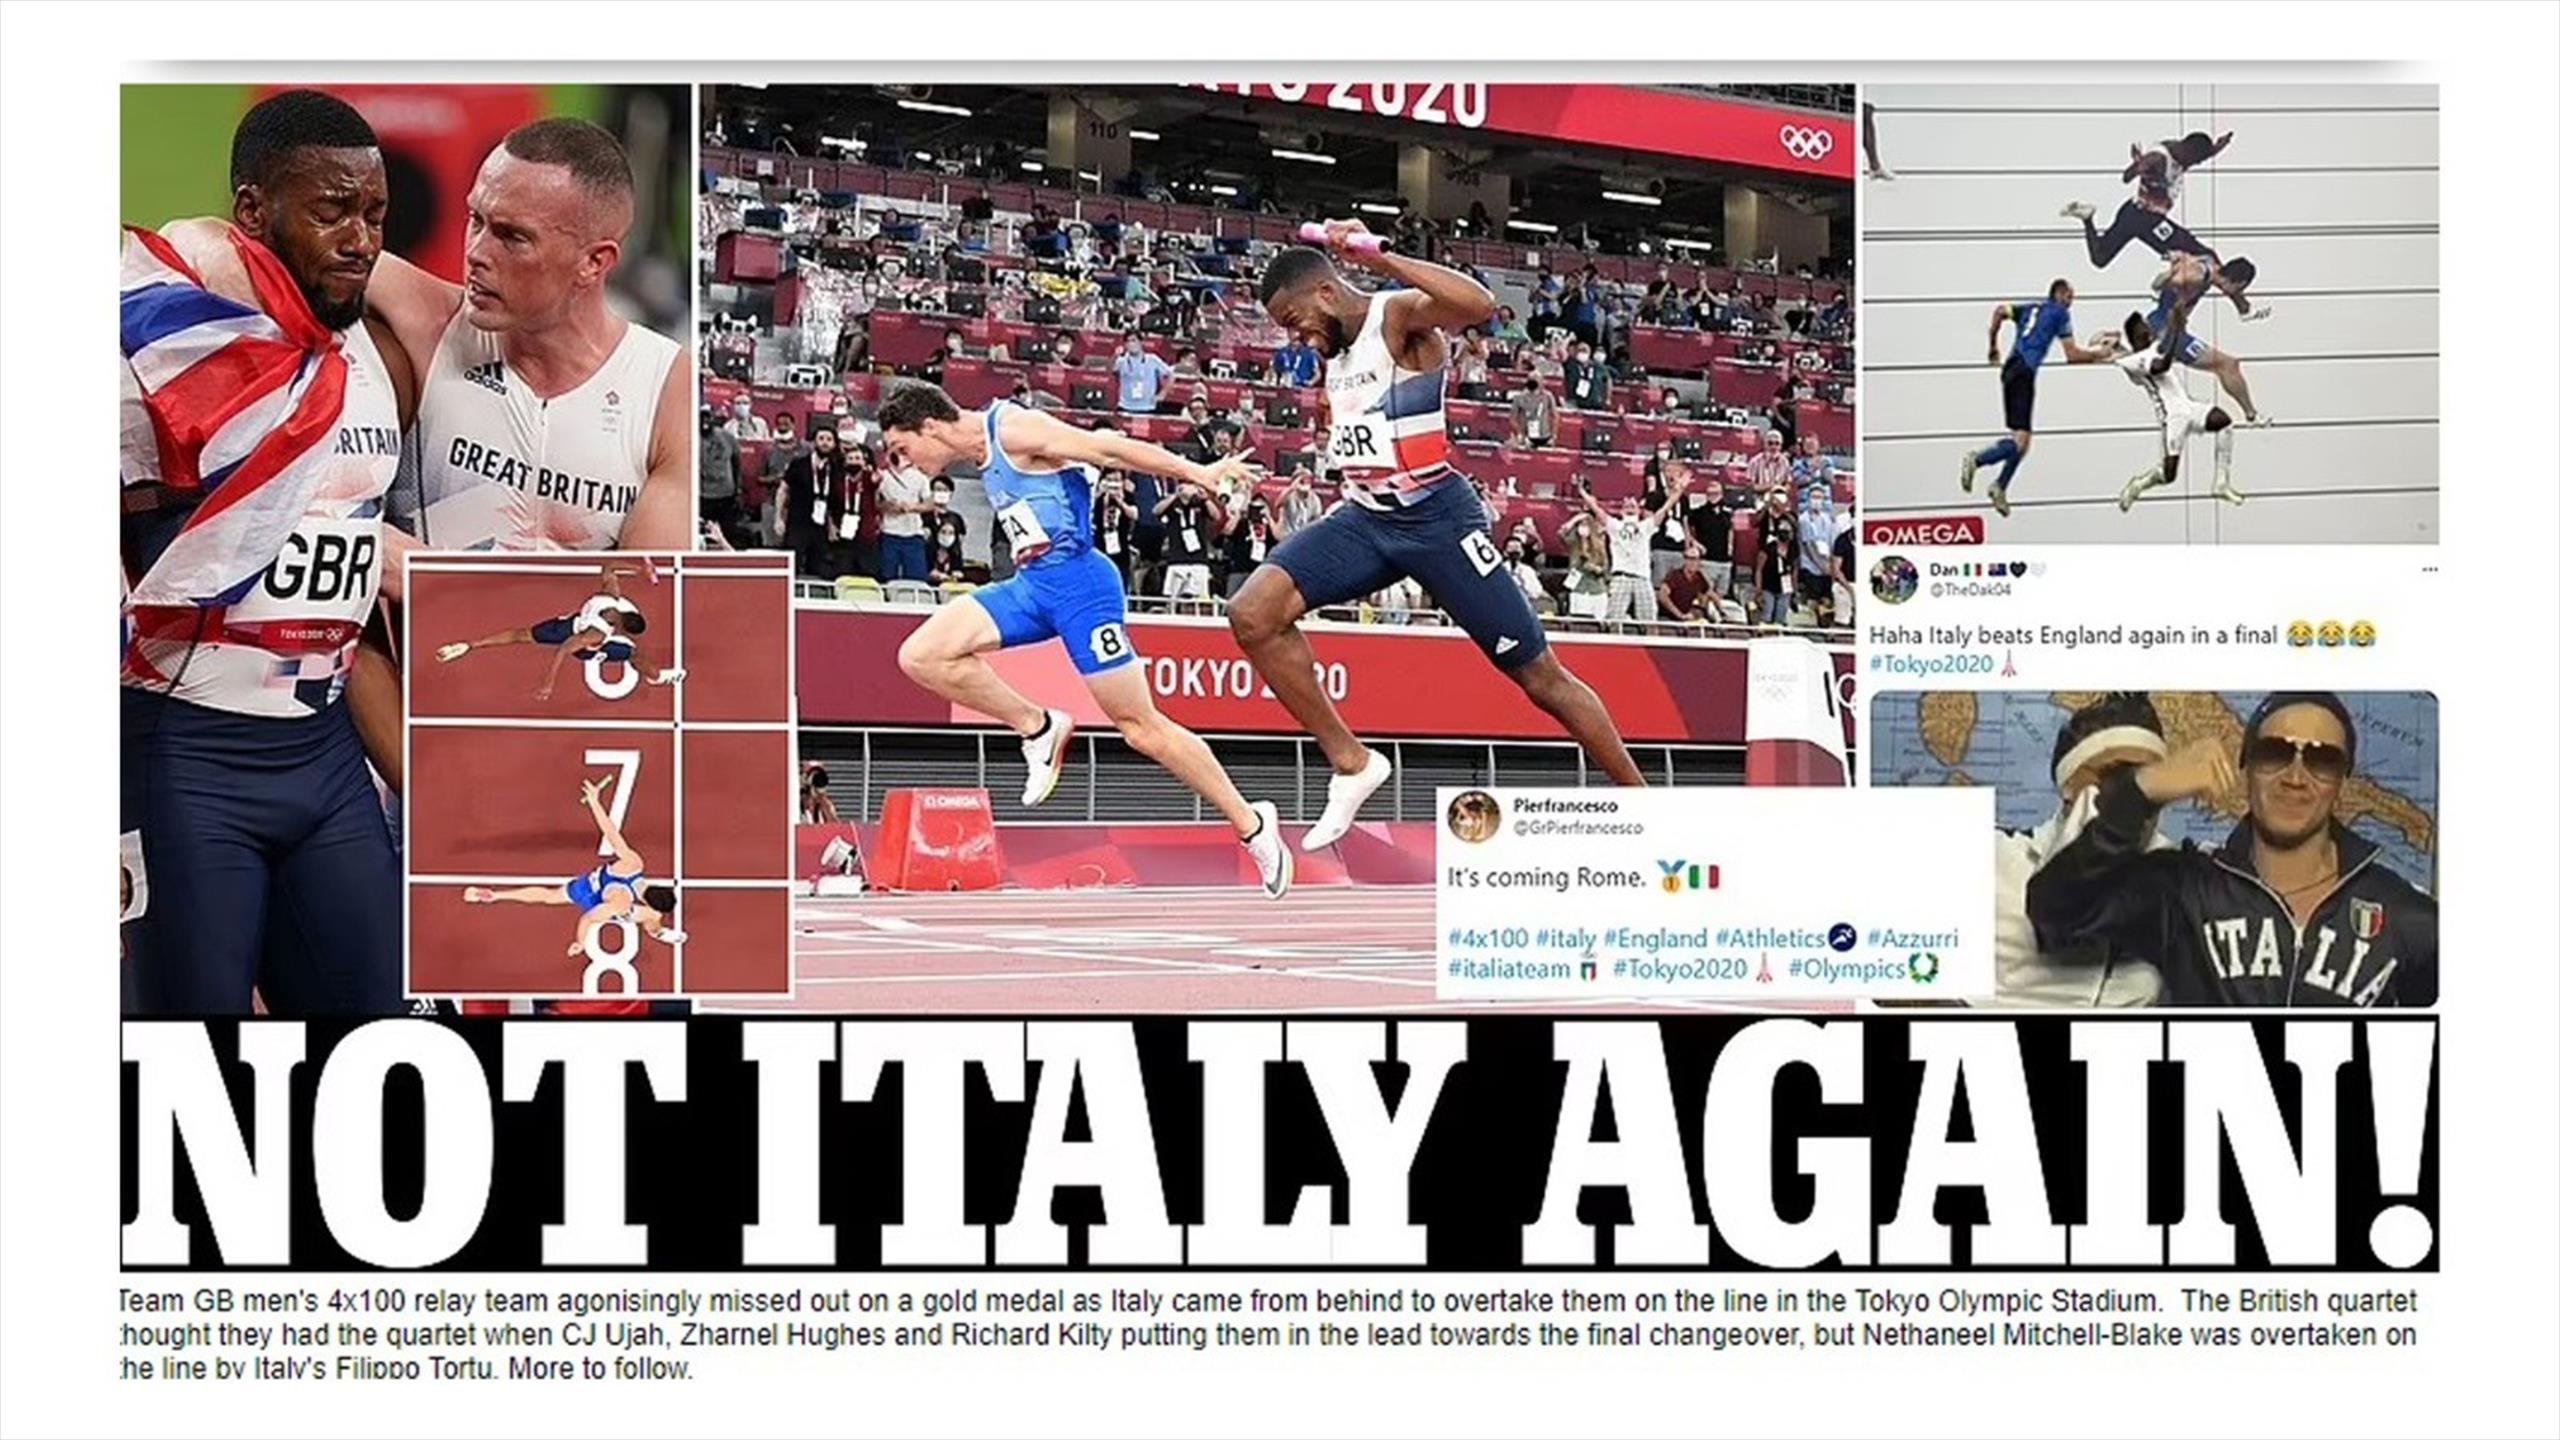 Olympia 2021: As with the European Football Championship, Great Britain is desperate for Italy at the Olympics